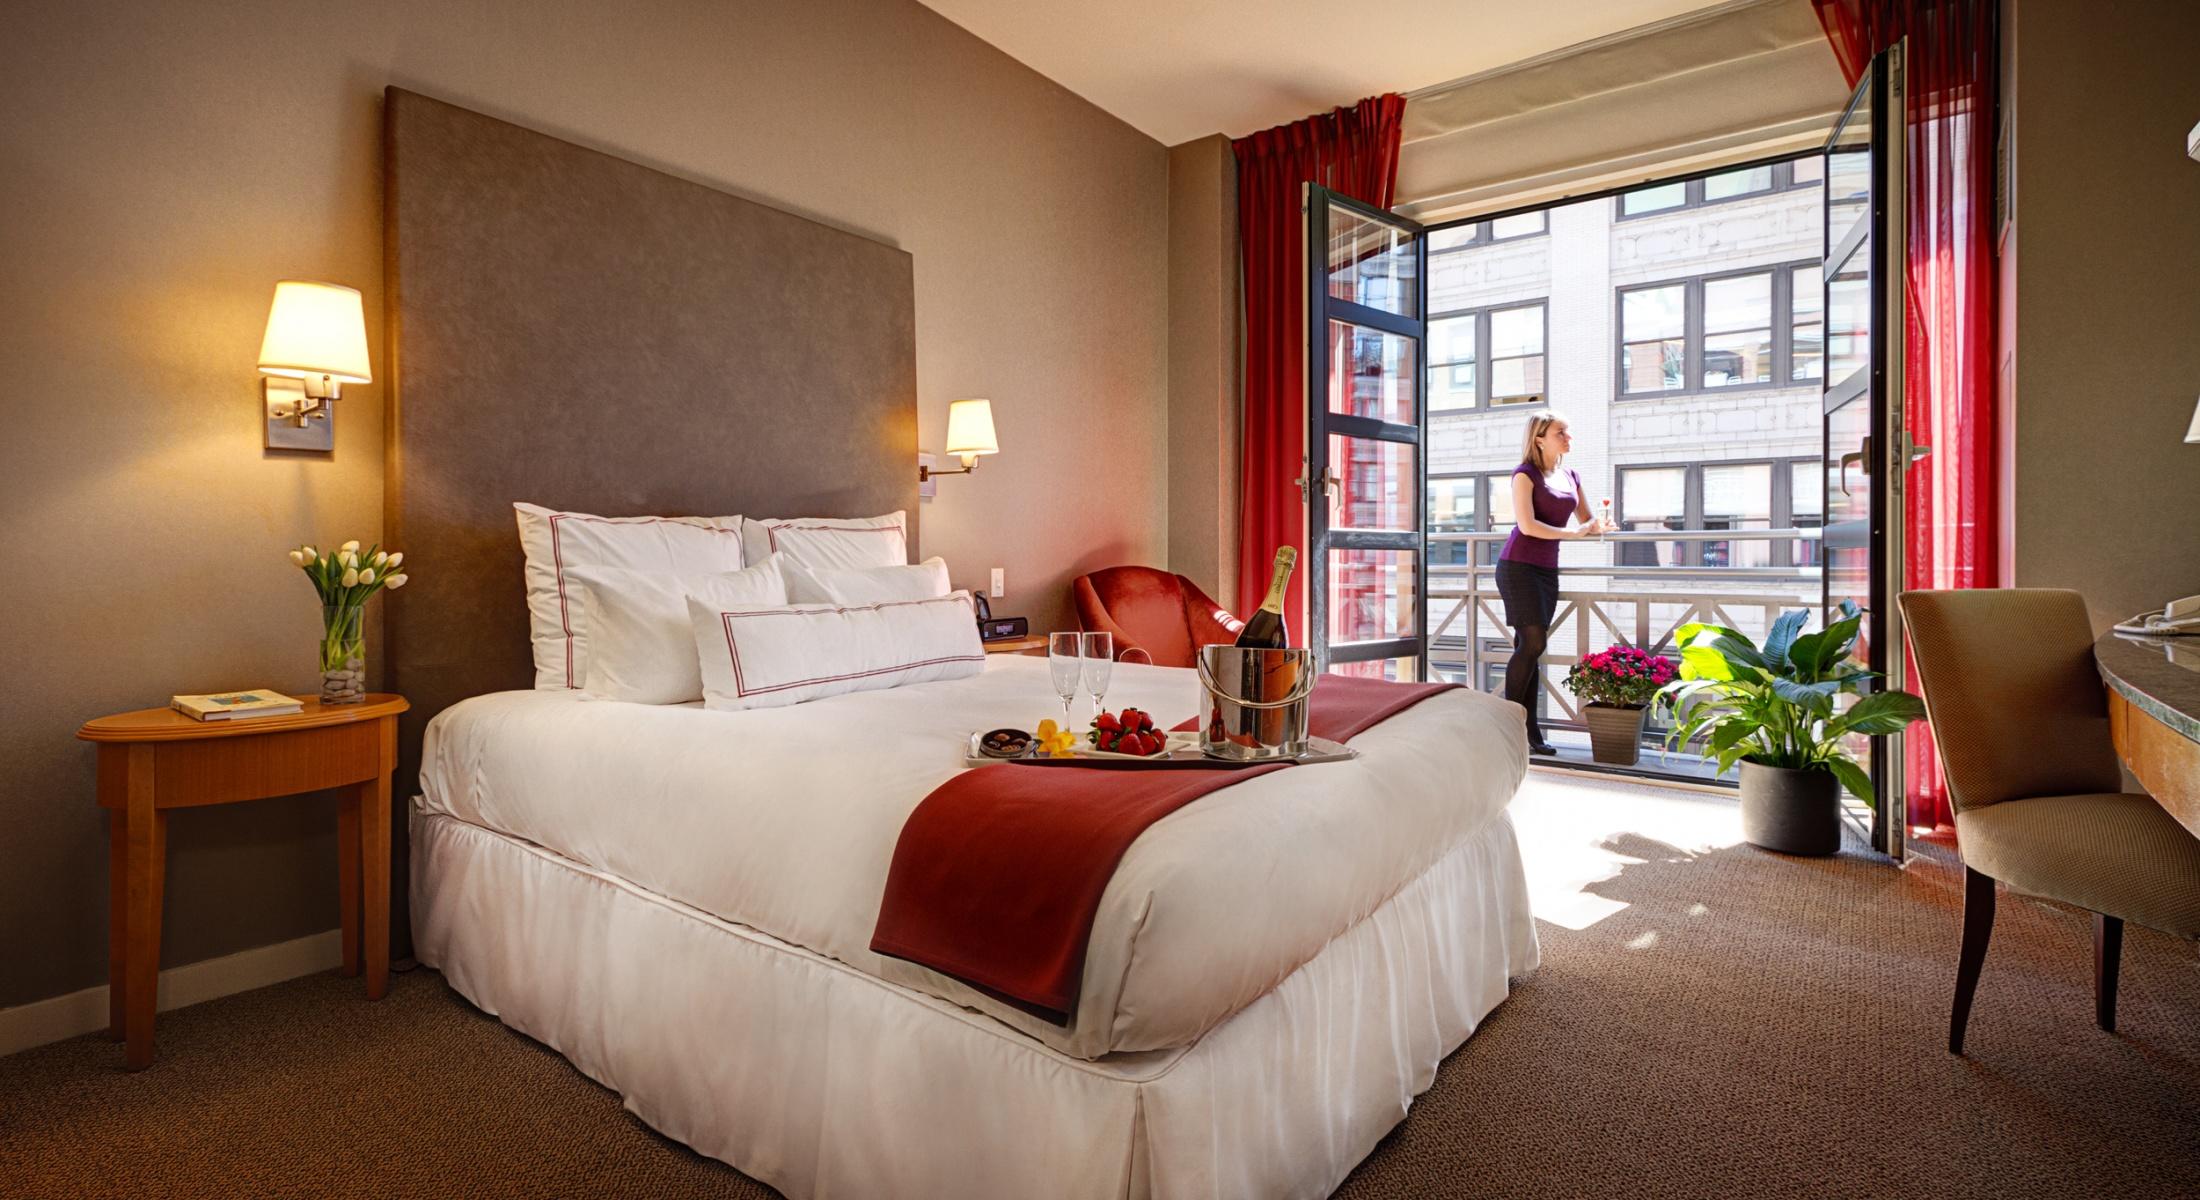 Most of our Guestrooms with 1 Queen Bed offer Juliet Balconies overlooking 26th Street.